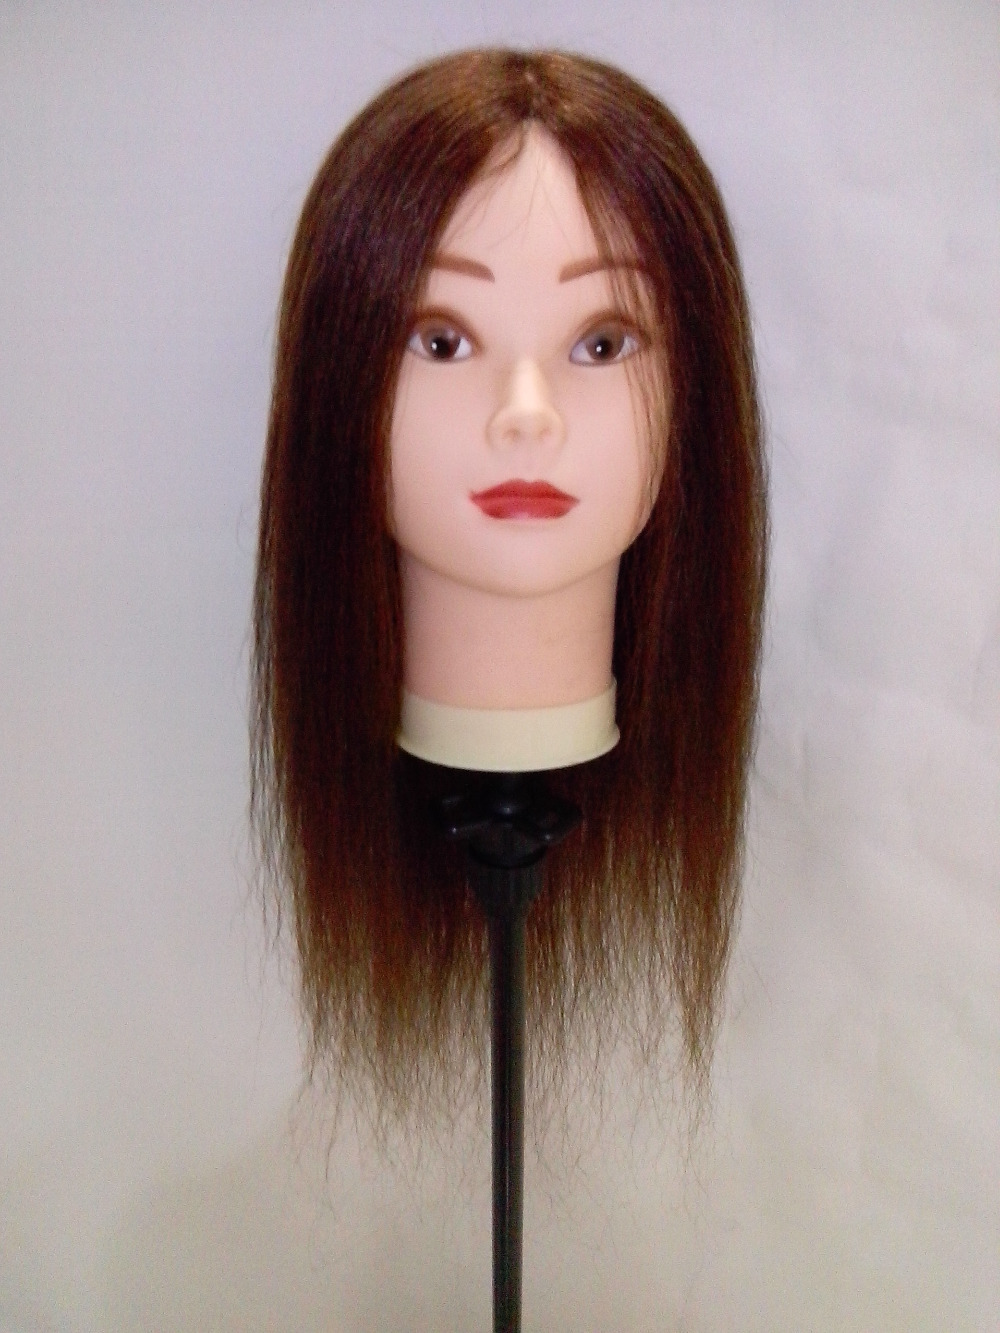 Mannequin-Head-With-font-b-Hair-b-font-For-Hairdressing-Training-Practice-font-b-Model-b.jpg